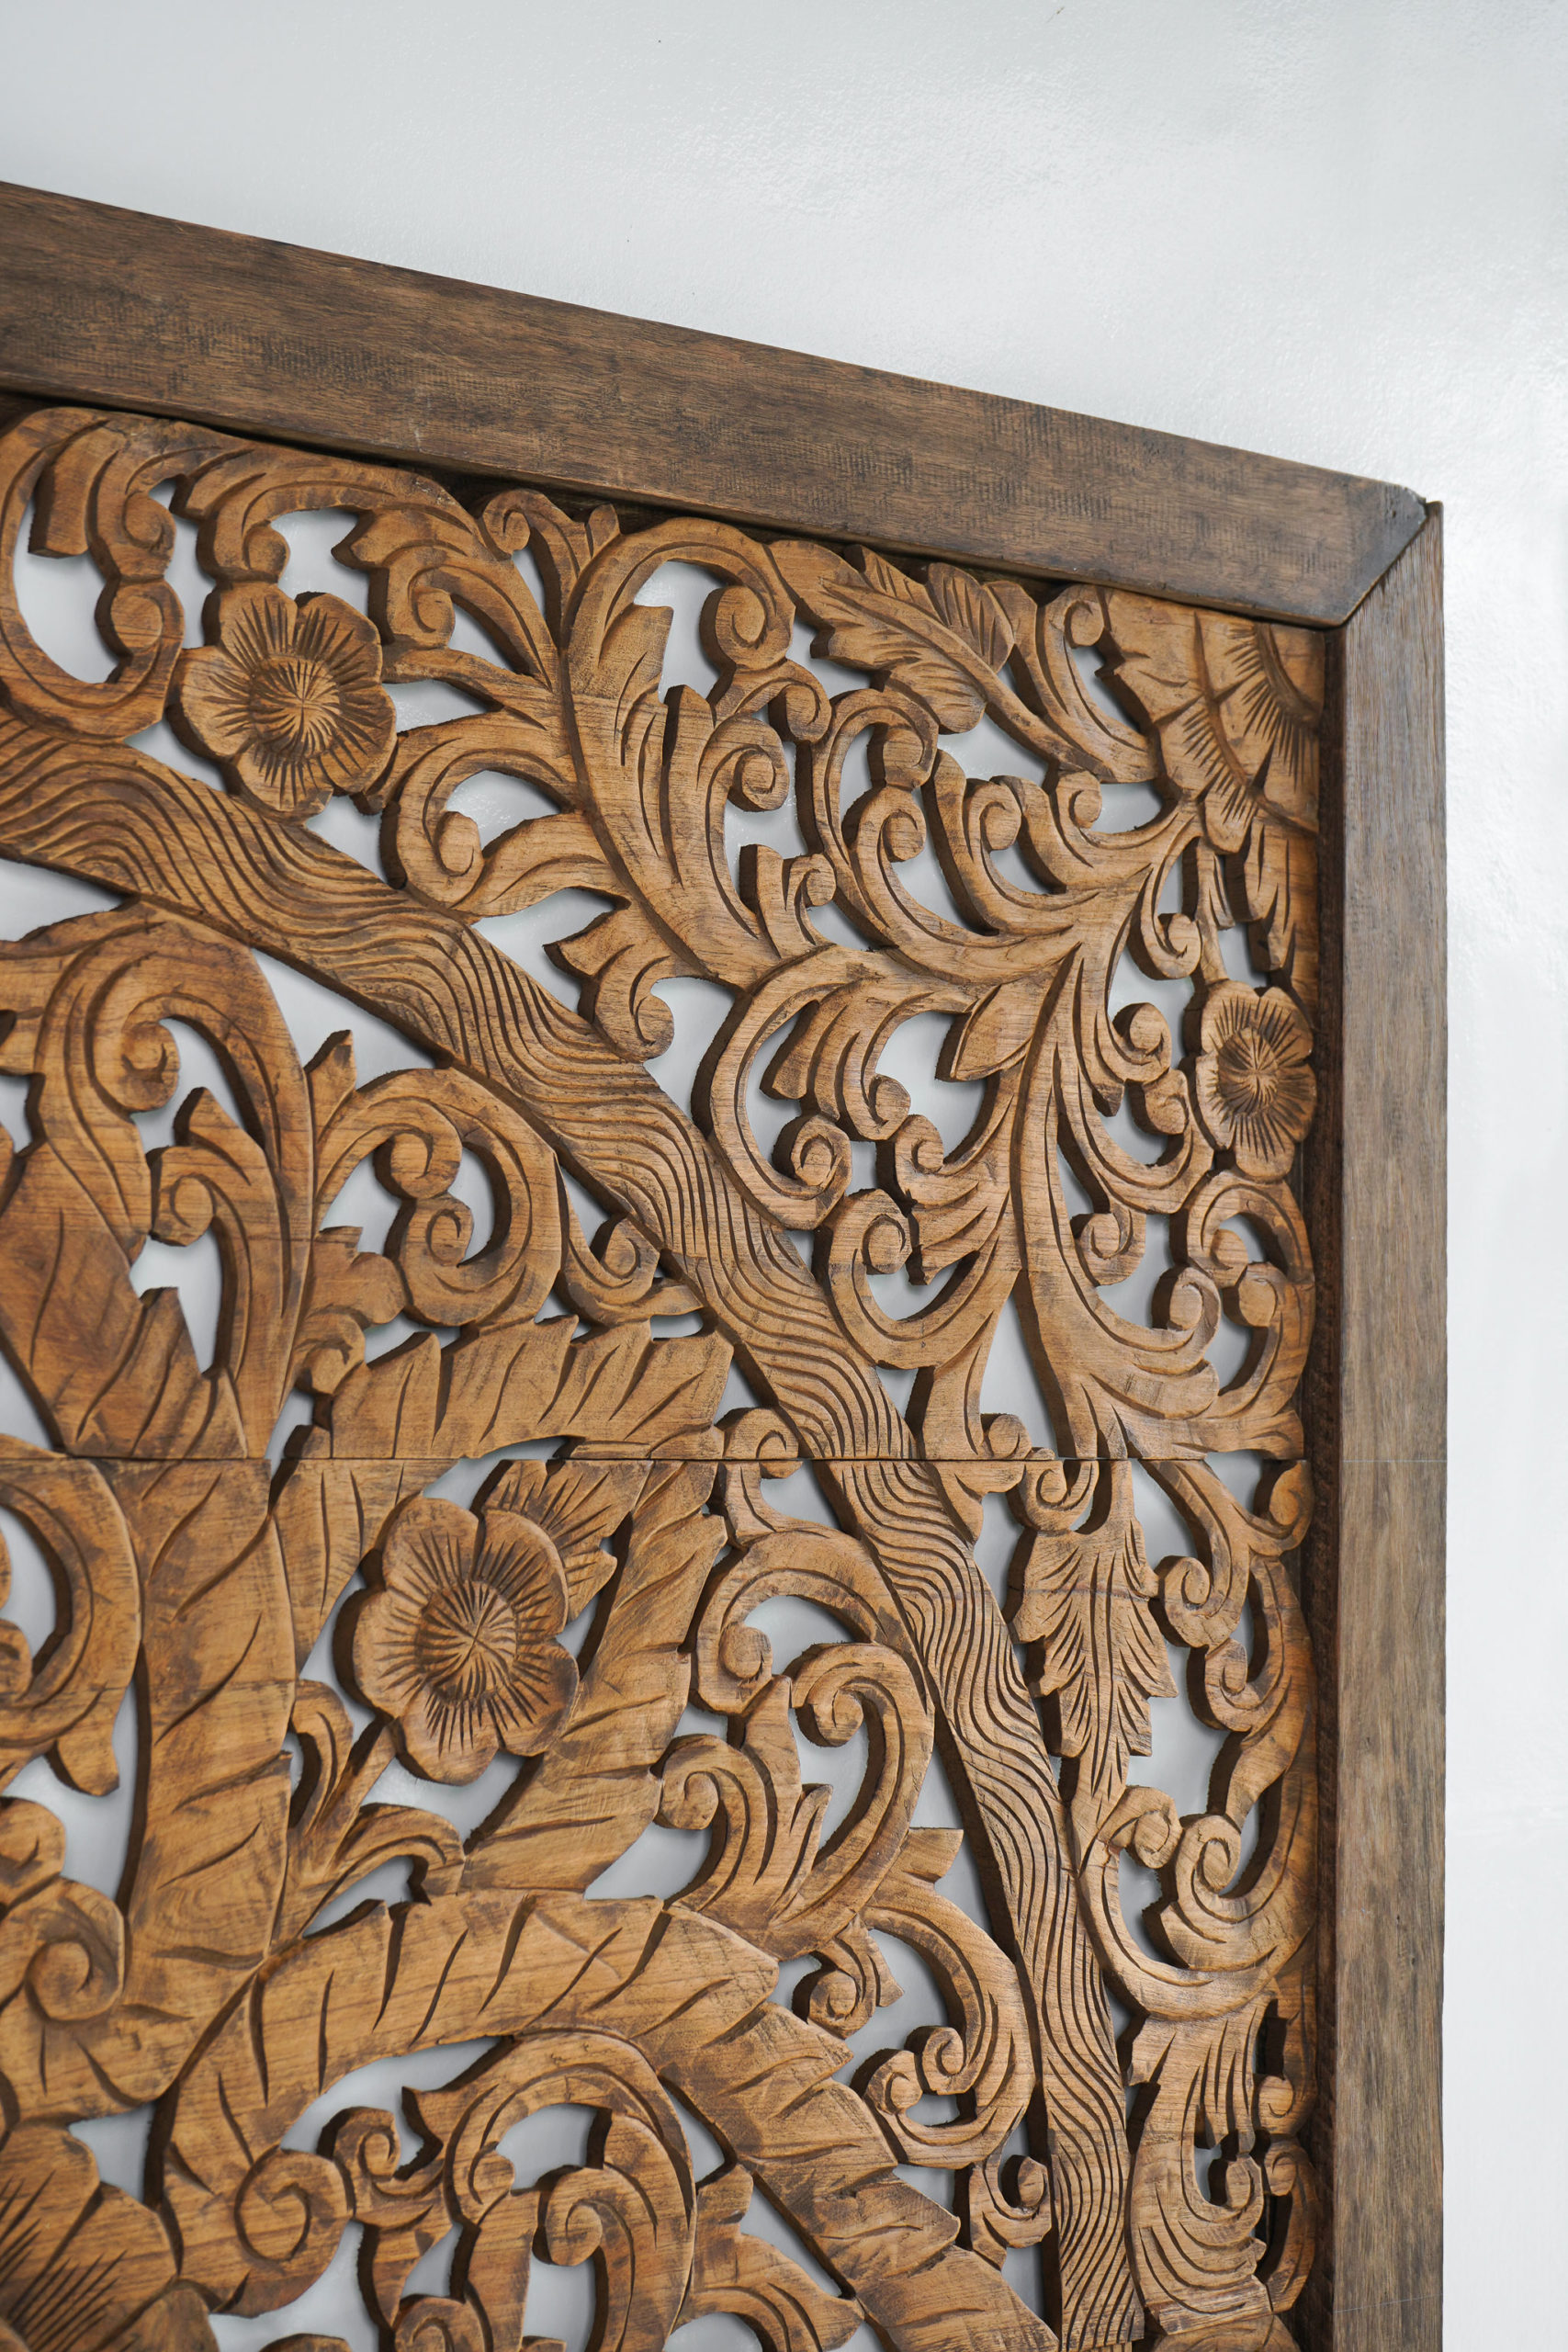 Carved Headboard Cottage Decor, Carved Wood Headboard Full Size